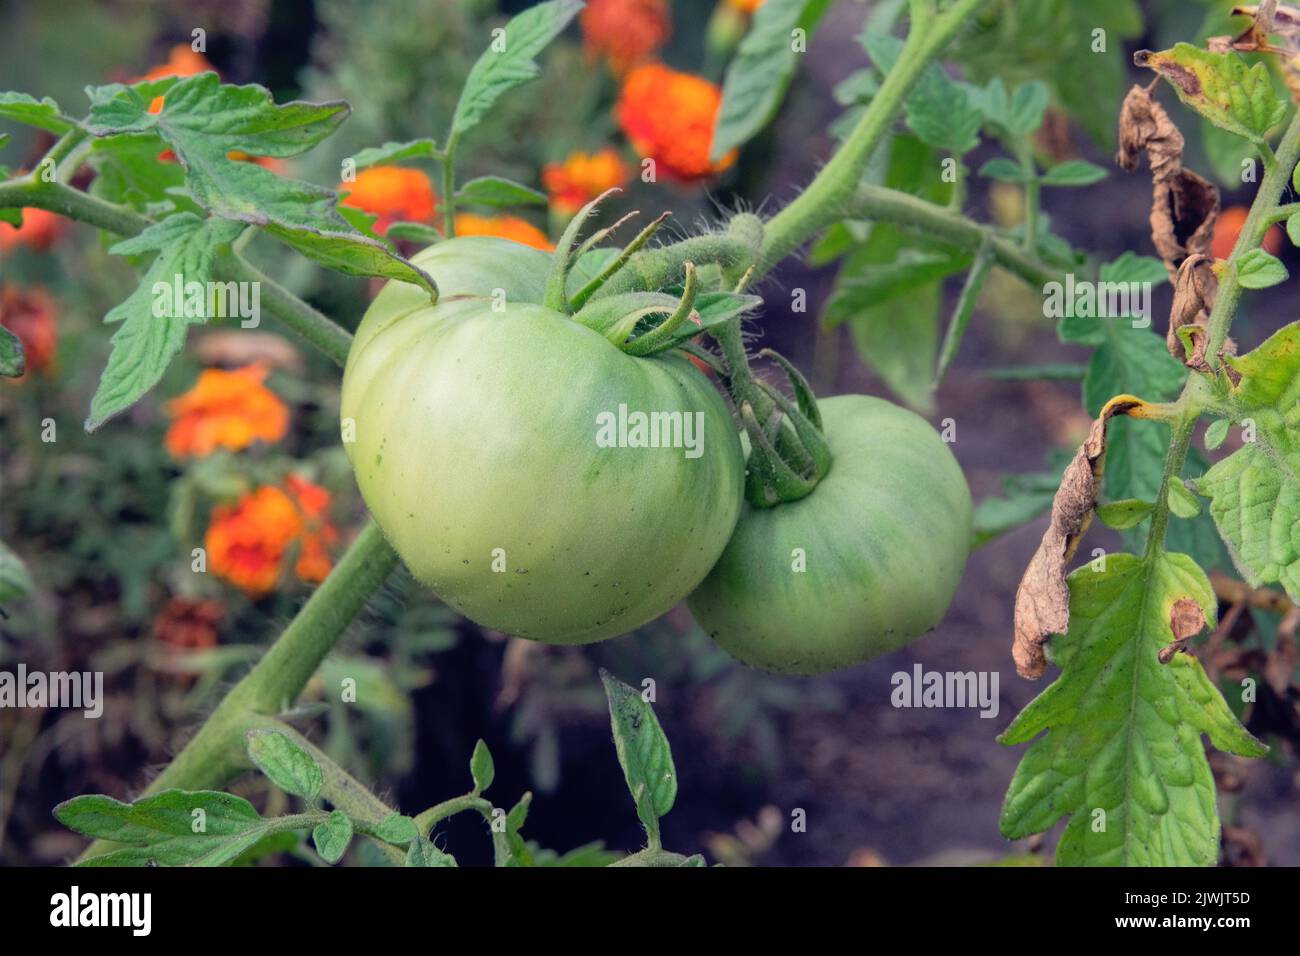 Green tomatoes is growing in rustic garden. Organic green tomatoes in farming and harvesting. Growing vegetables at home in farming. Stock Photo